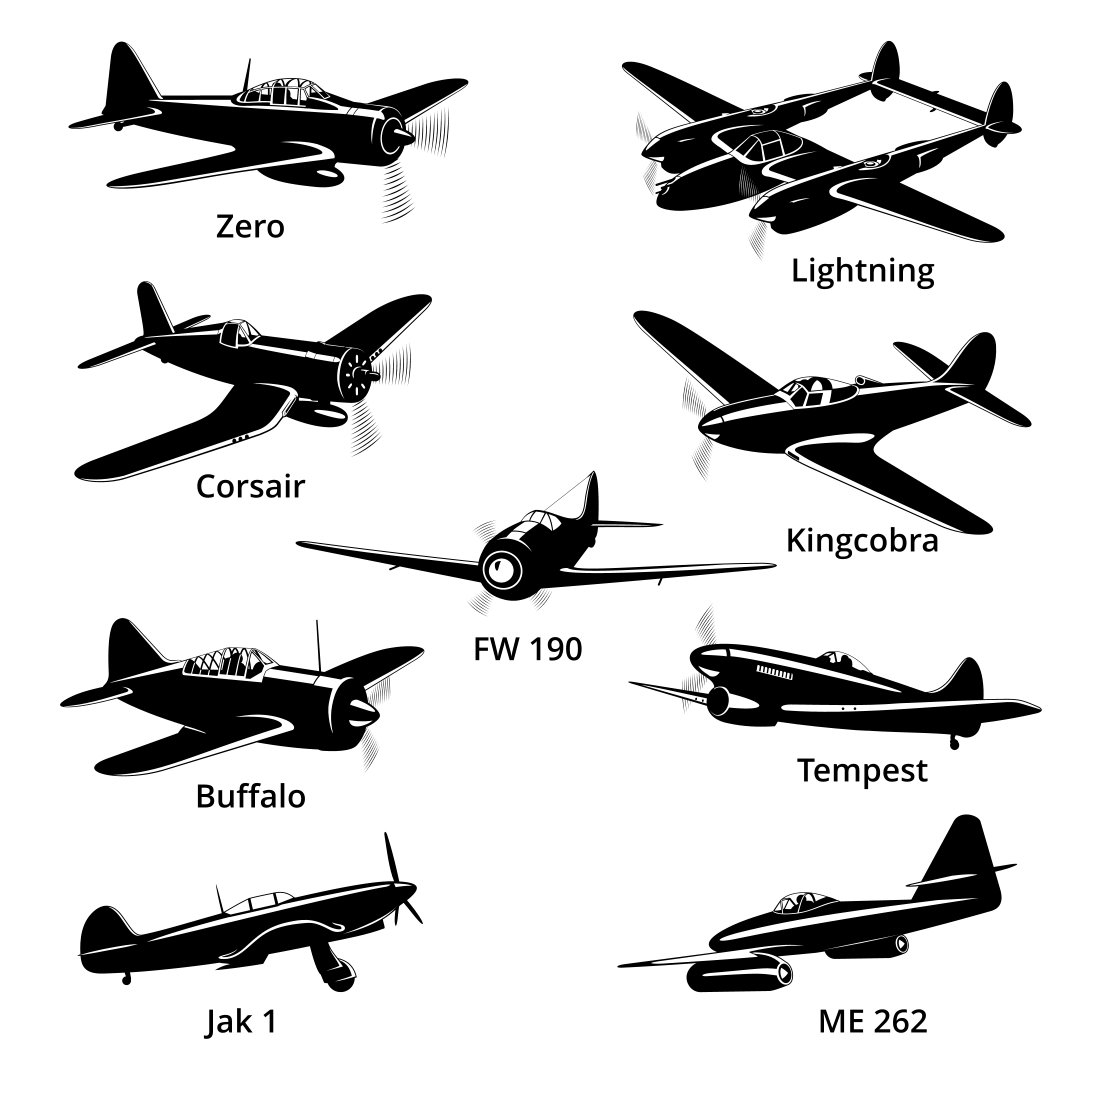 Fighter Planes WWII Aircrafts Silhouettes cover image.